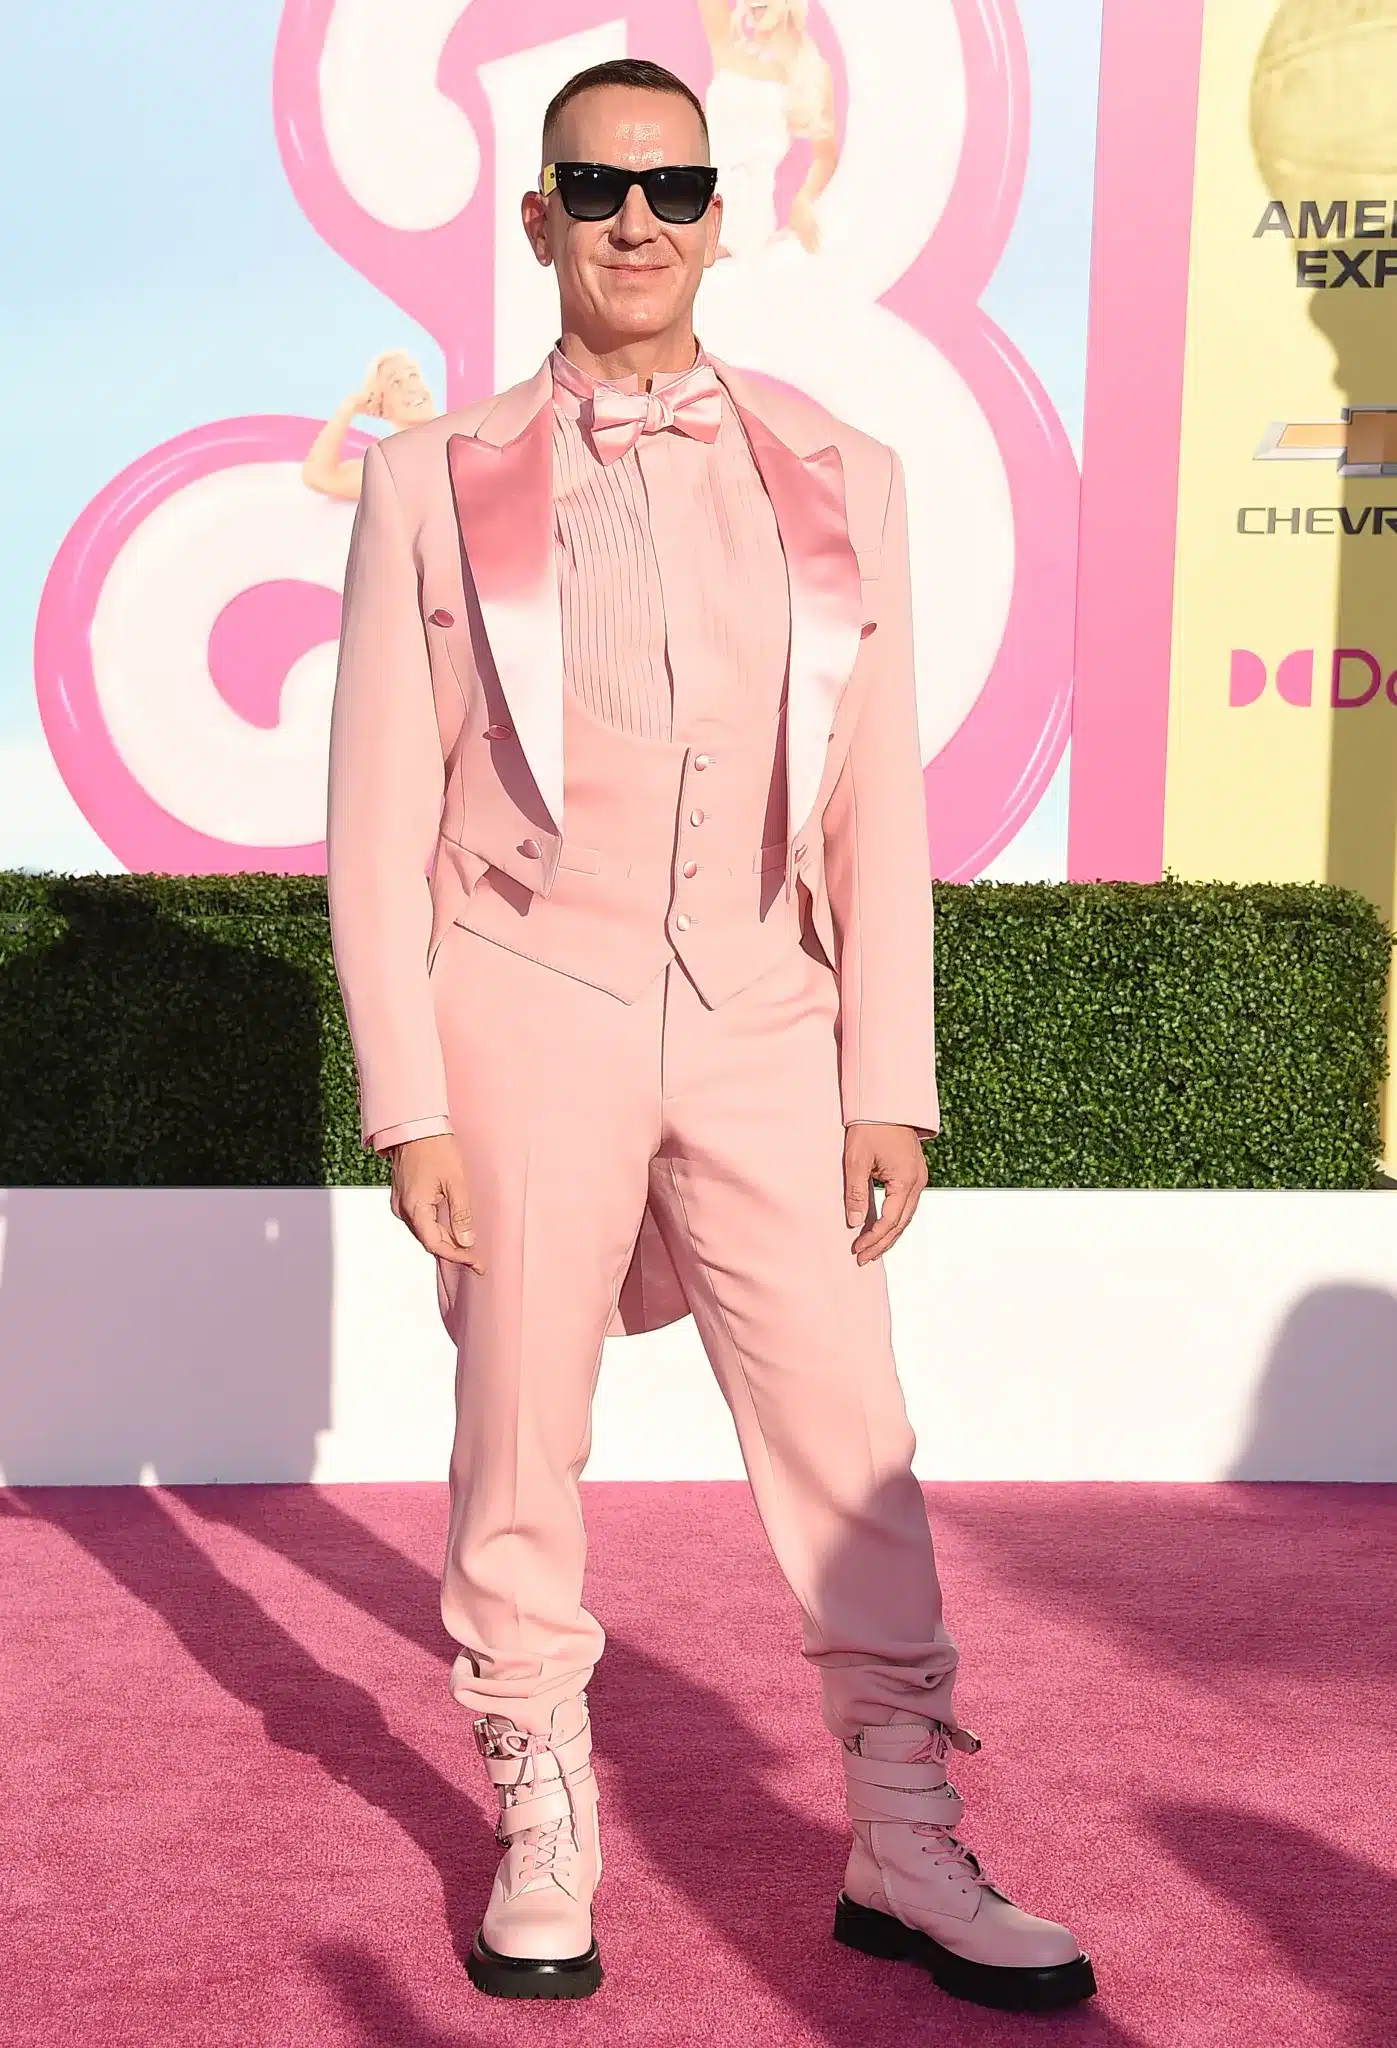 Designer Jeremy Scott at the premiere of the movie "Barbie" in Los Angeles.